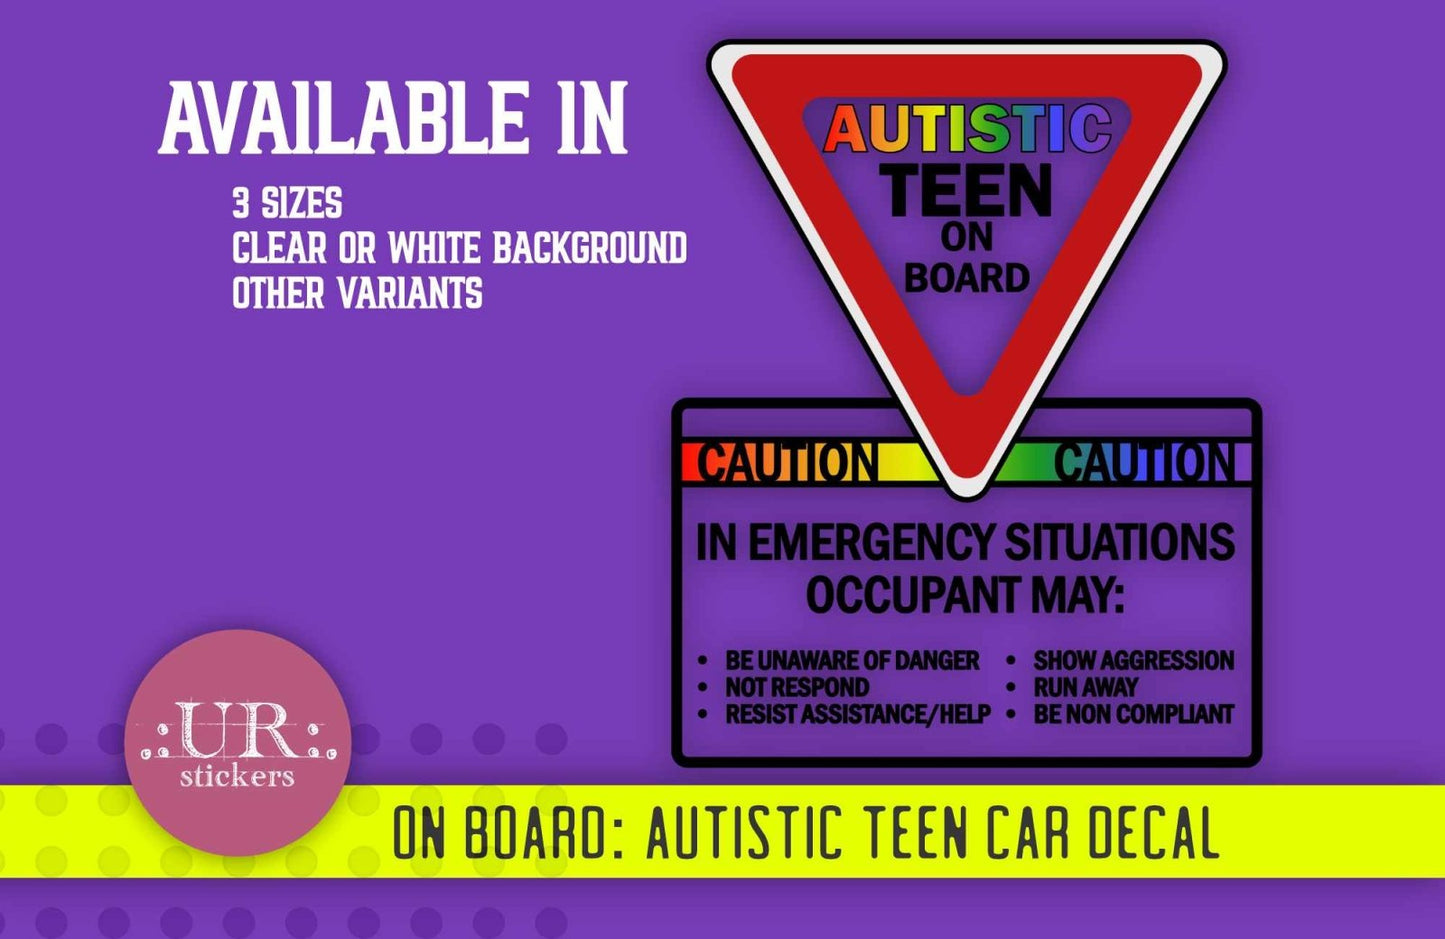 Autistic Child On Board Car Truck Decal Sticker - Stickers - UpperRoomPrints